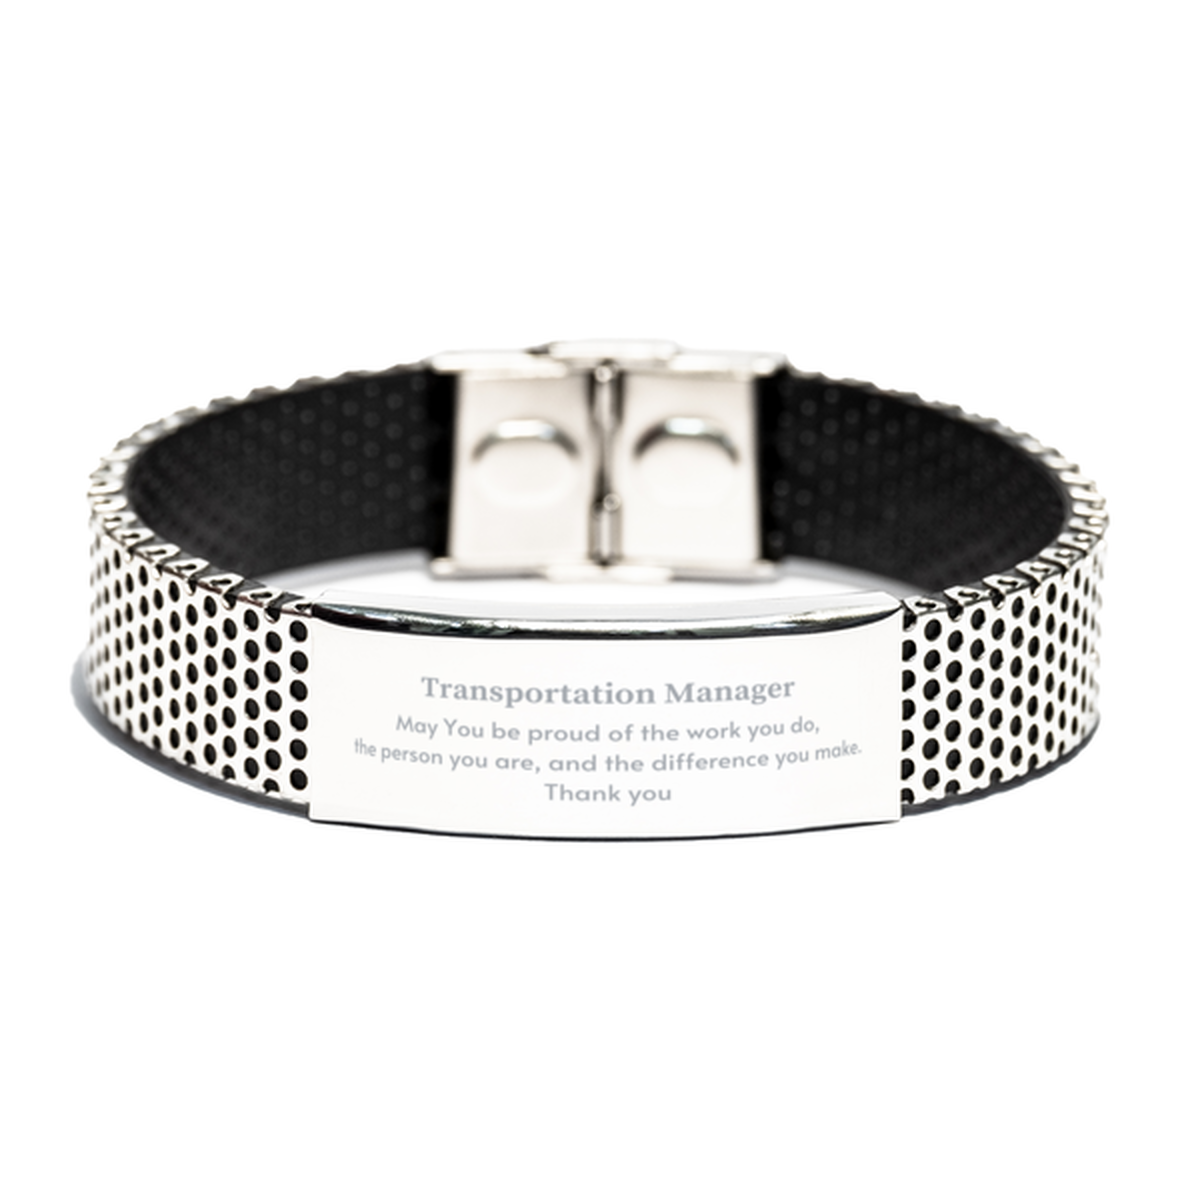 Heartwarming Stainless Steel Bracelet Retirement Coworkers Gifts for Transportation Manager, Transportation Manager May You be proud of the work you do, the person you are Gifts for Boss Men Women Friends